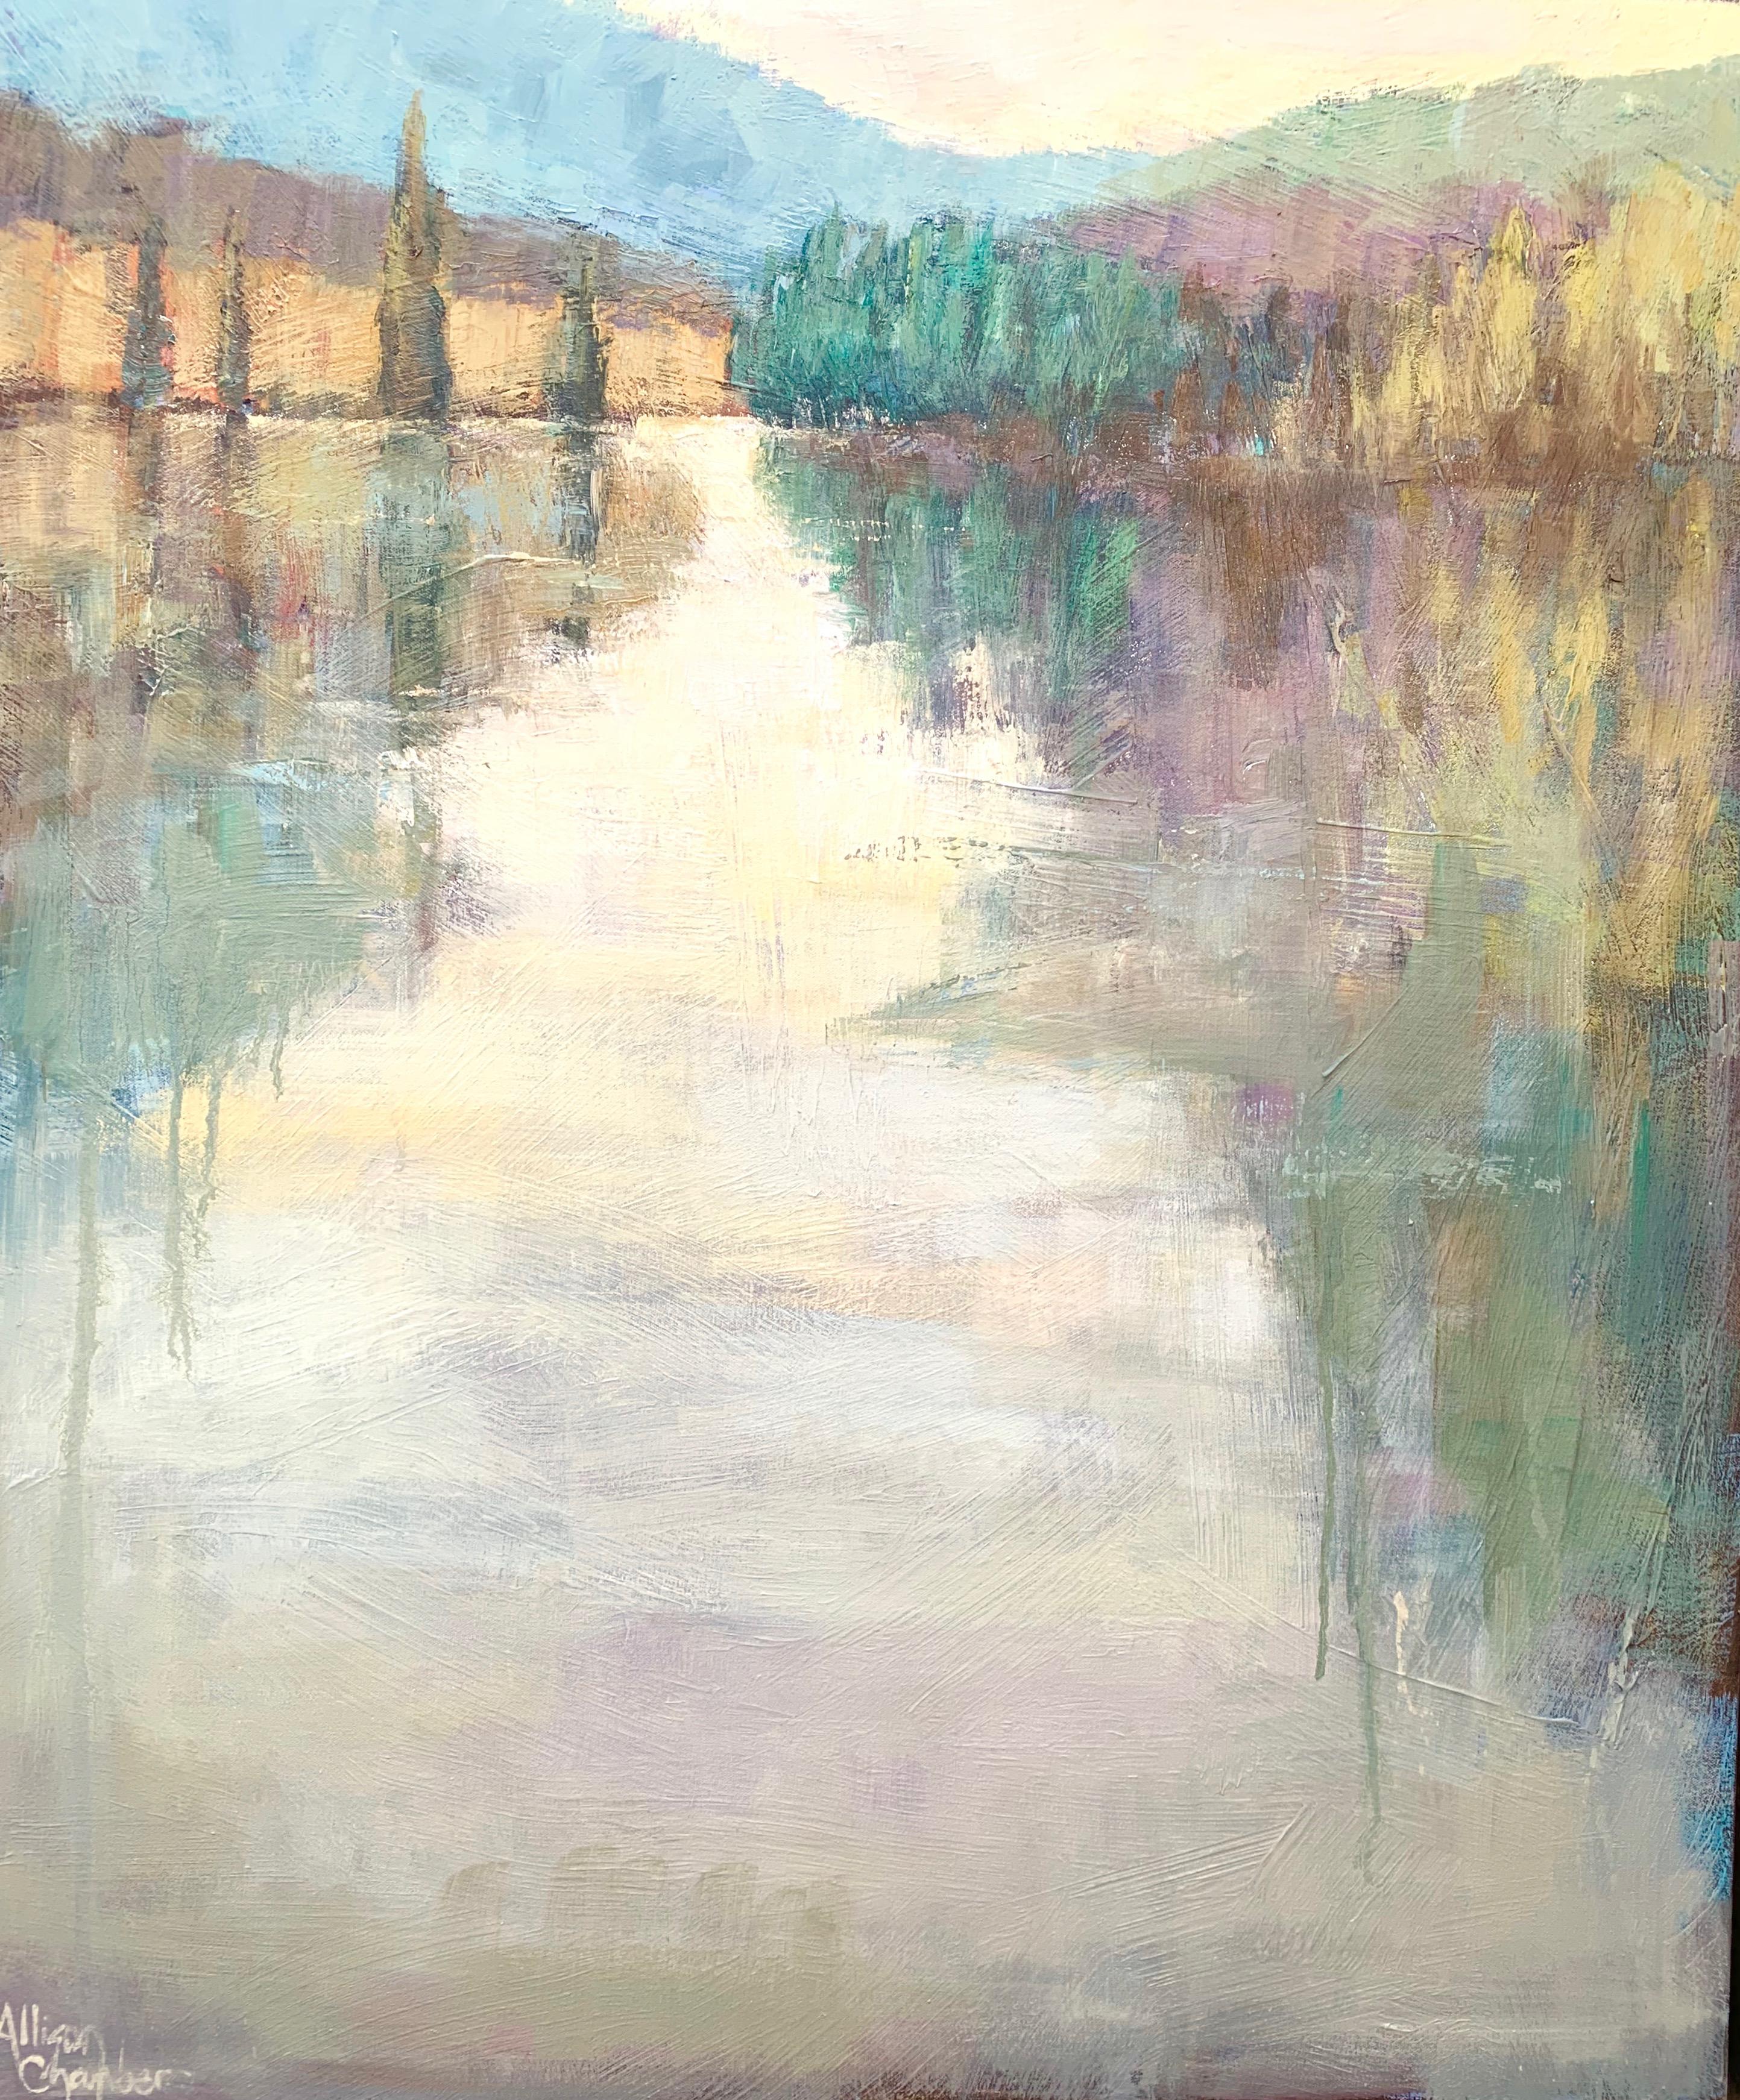 The unframed size is 36" x 30"

Allison’s softly rendered and beautifully painted landscapes and waterscapes capture light, depth and the constantly shifting movement of water, flora and fauna.

Her impasto technique incorporates the texture that